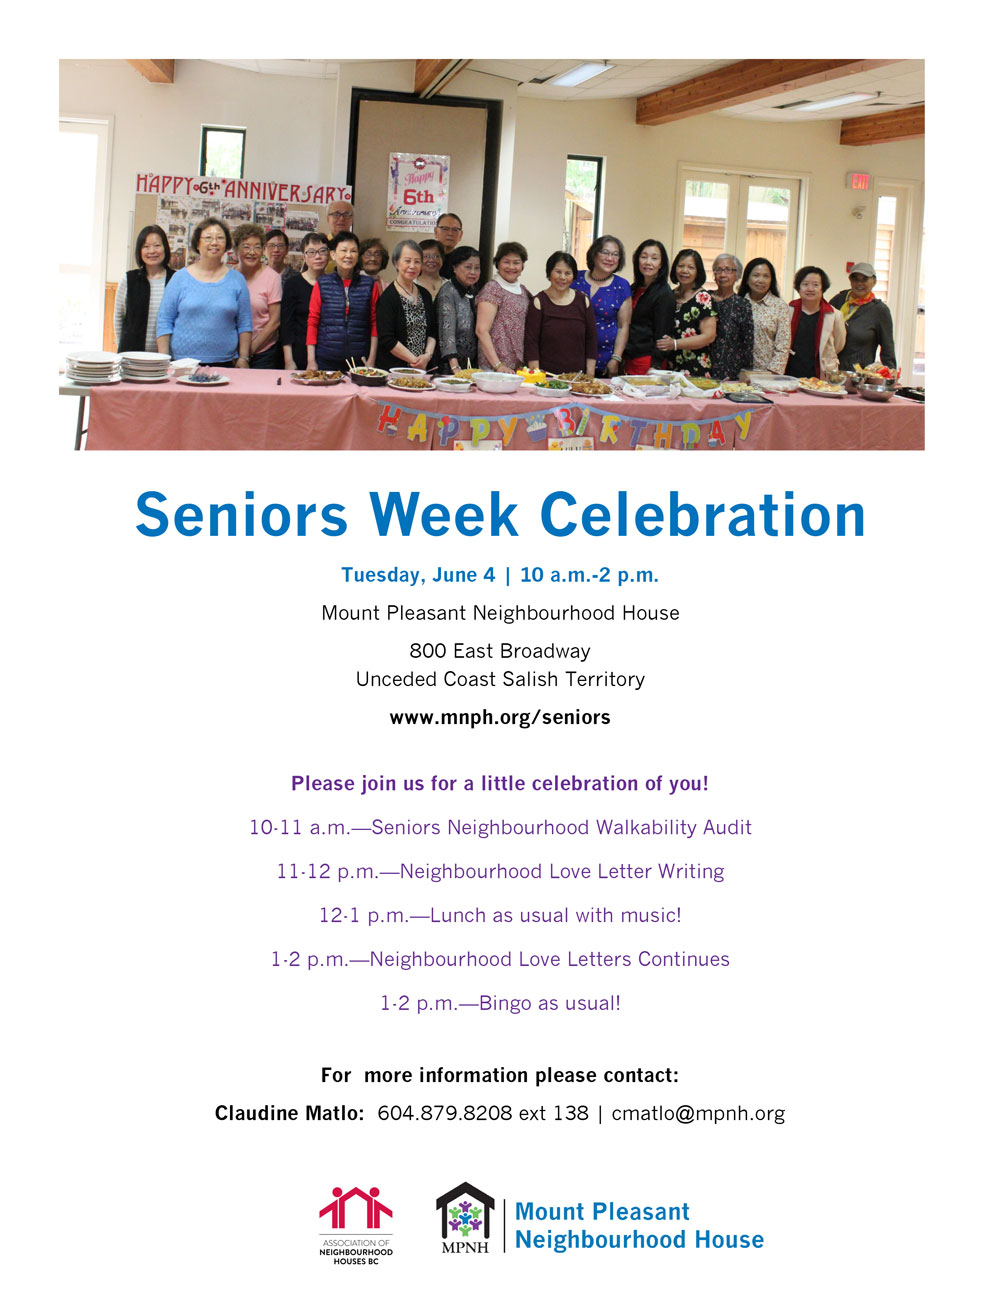 An image of the poster with event details, featuring a photo of more than 20 seniors from different cultural backgrounds celebrating a birthday.